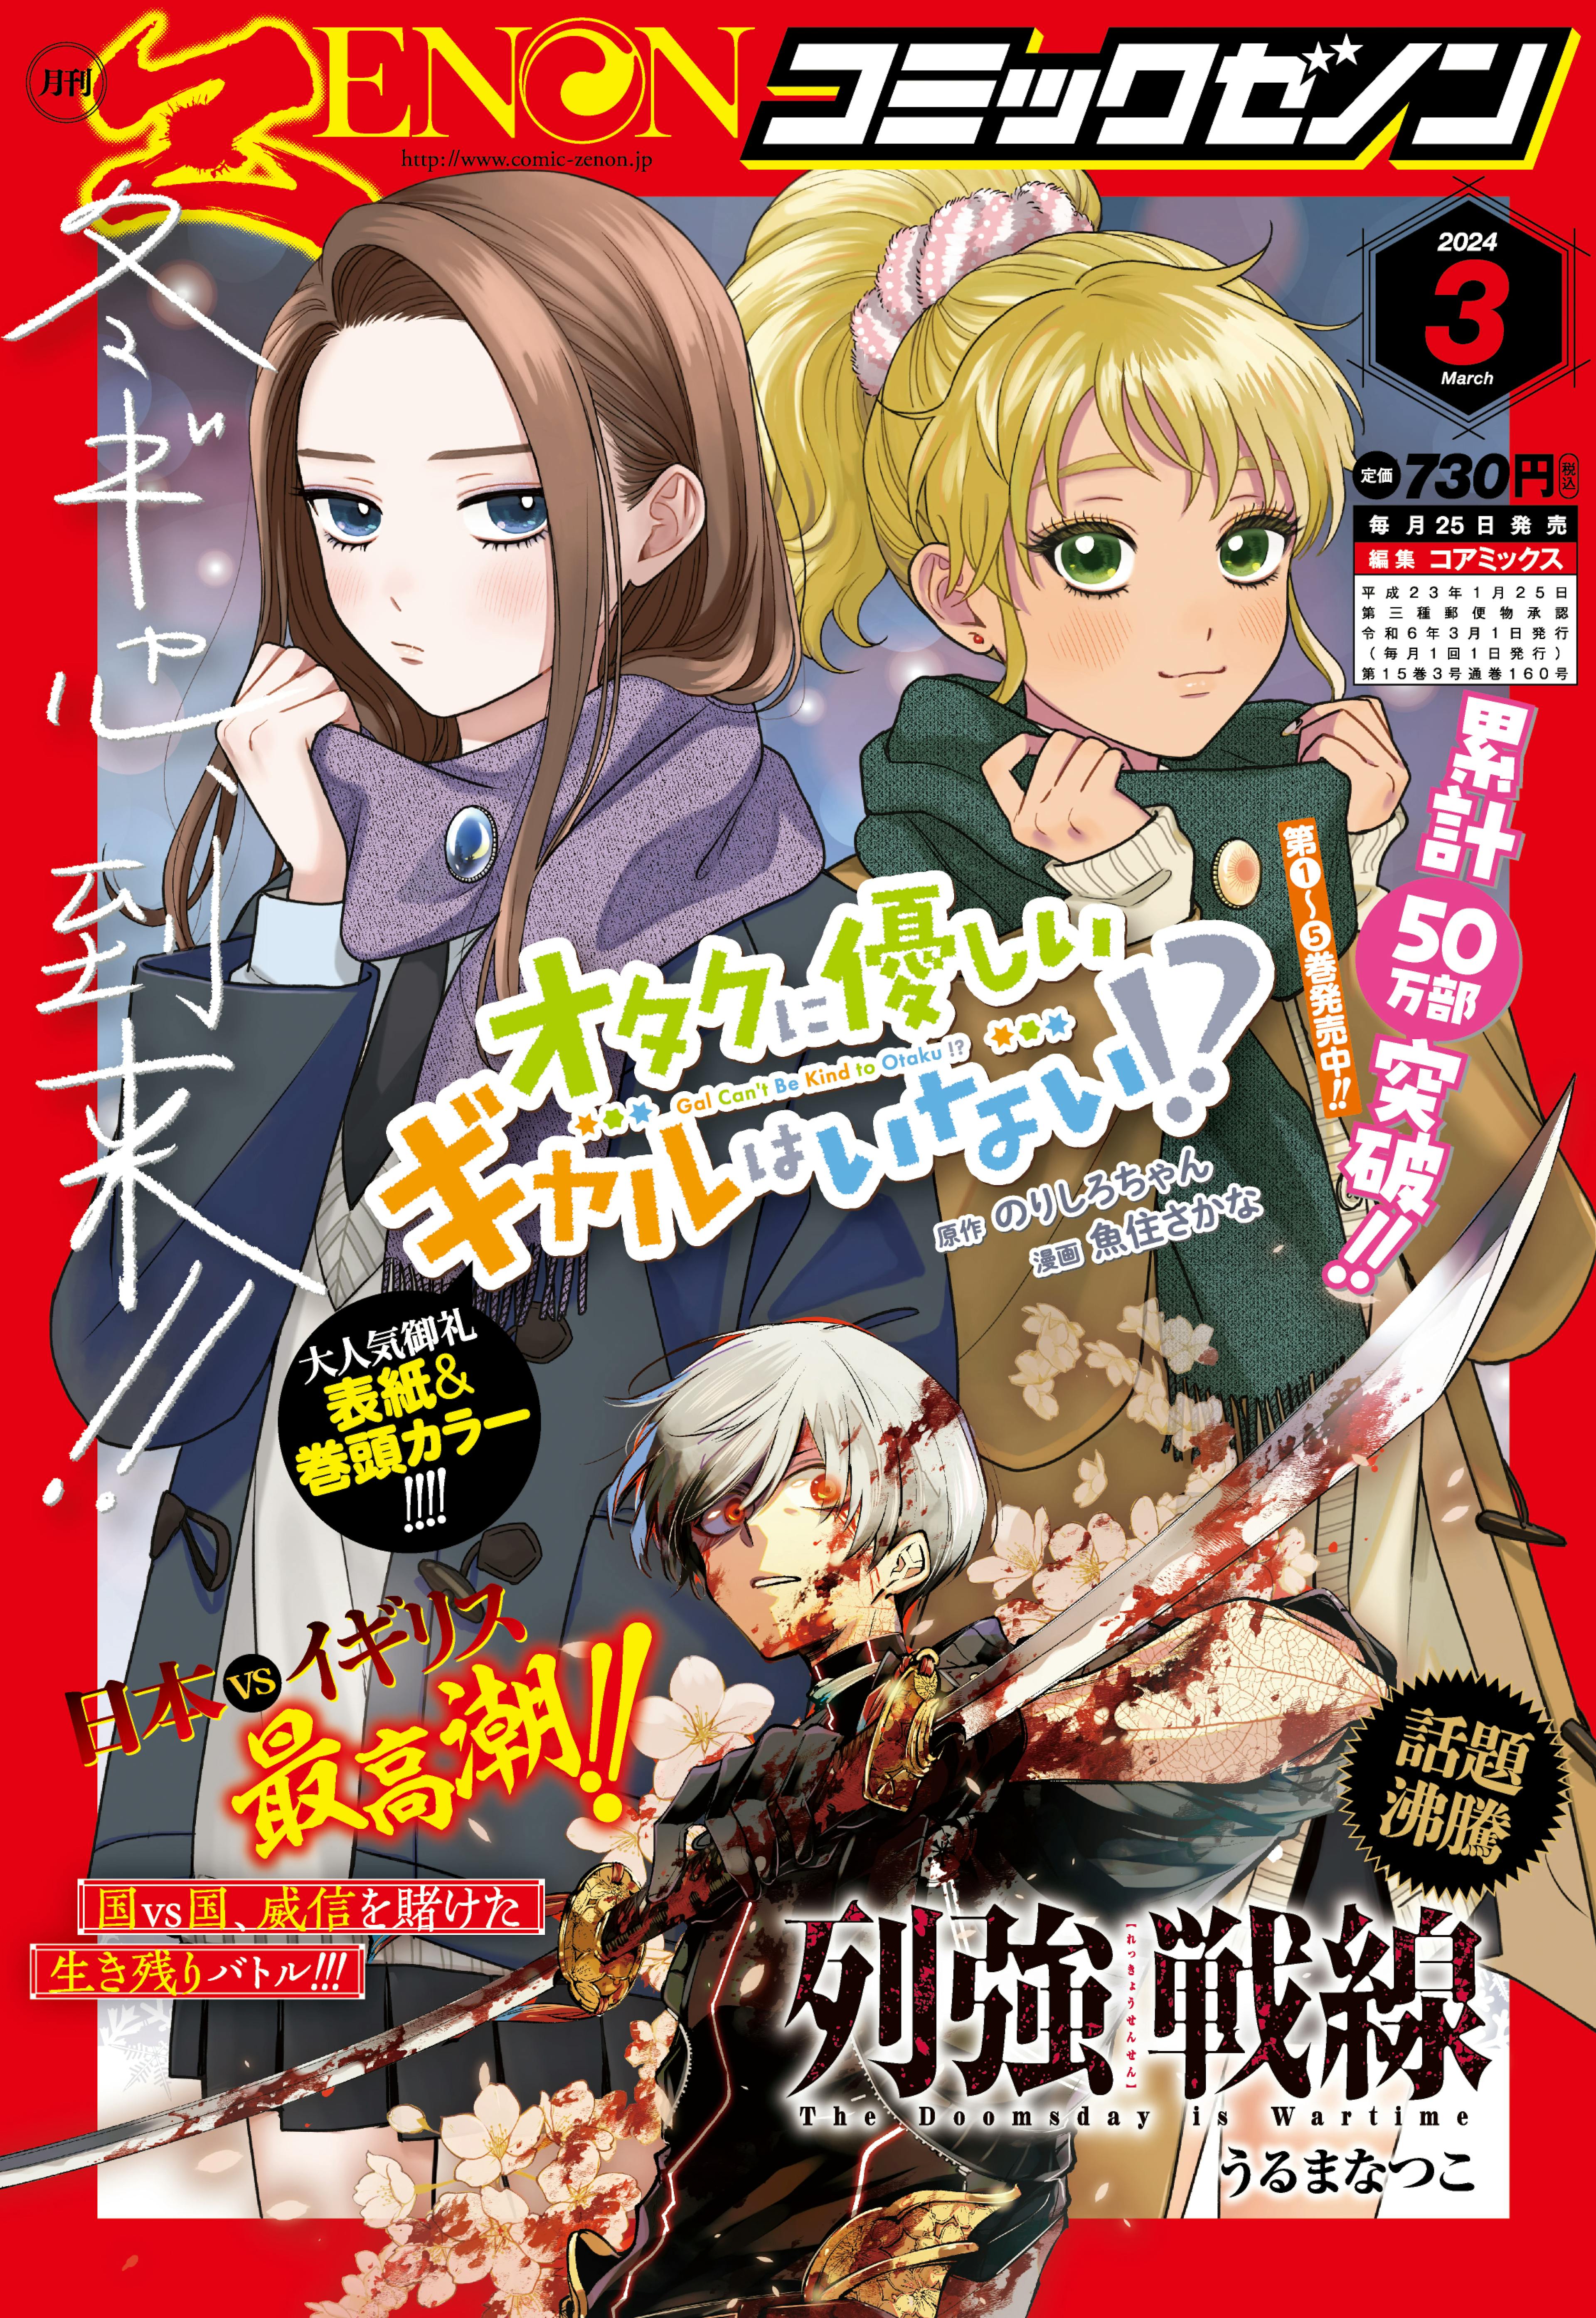 [Great attention] The latest episode of “The Great Powers Front” has been published! Monthly Comic Zenon March issue now on sale!